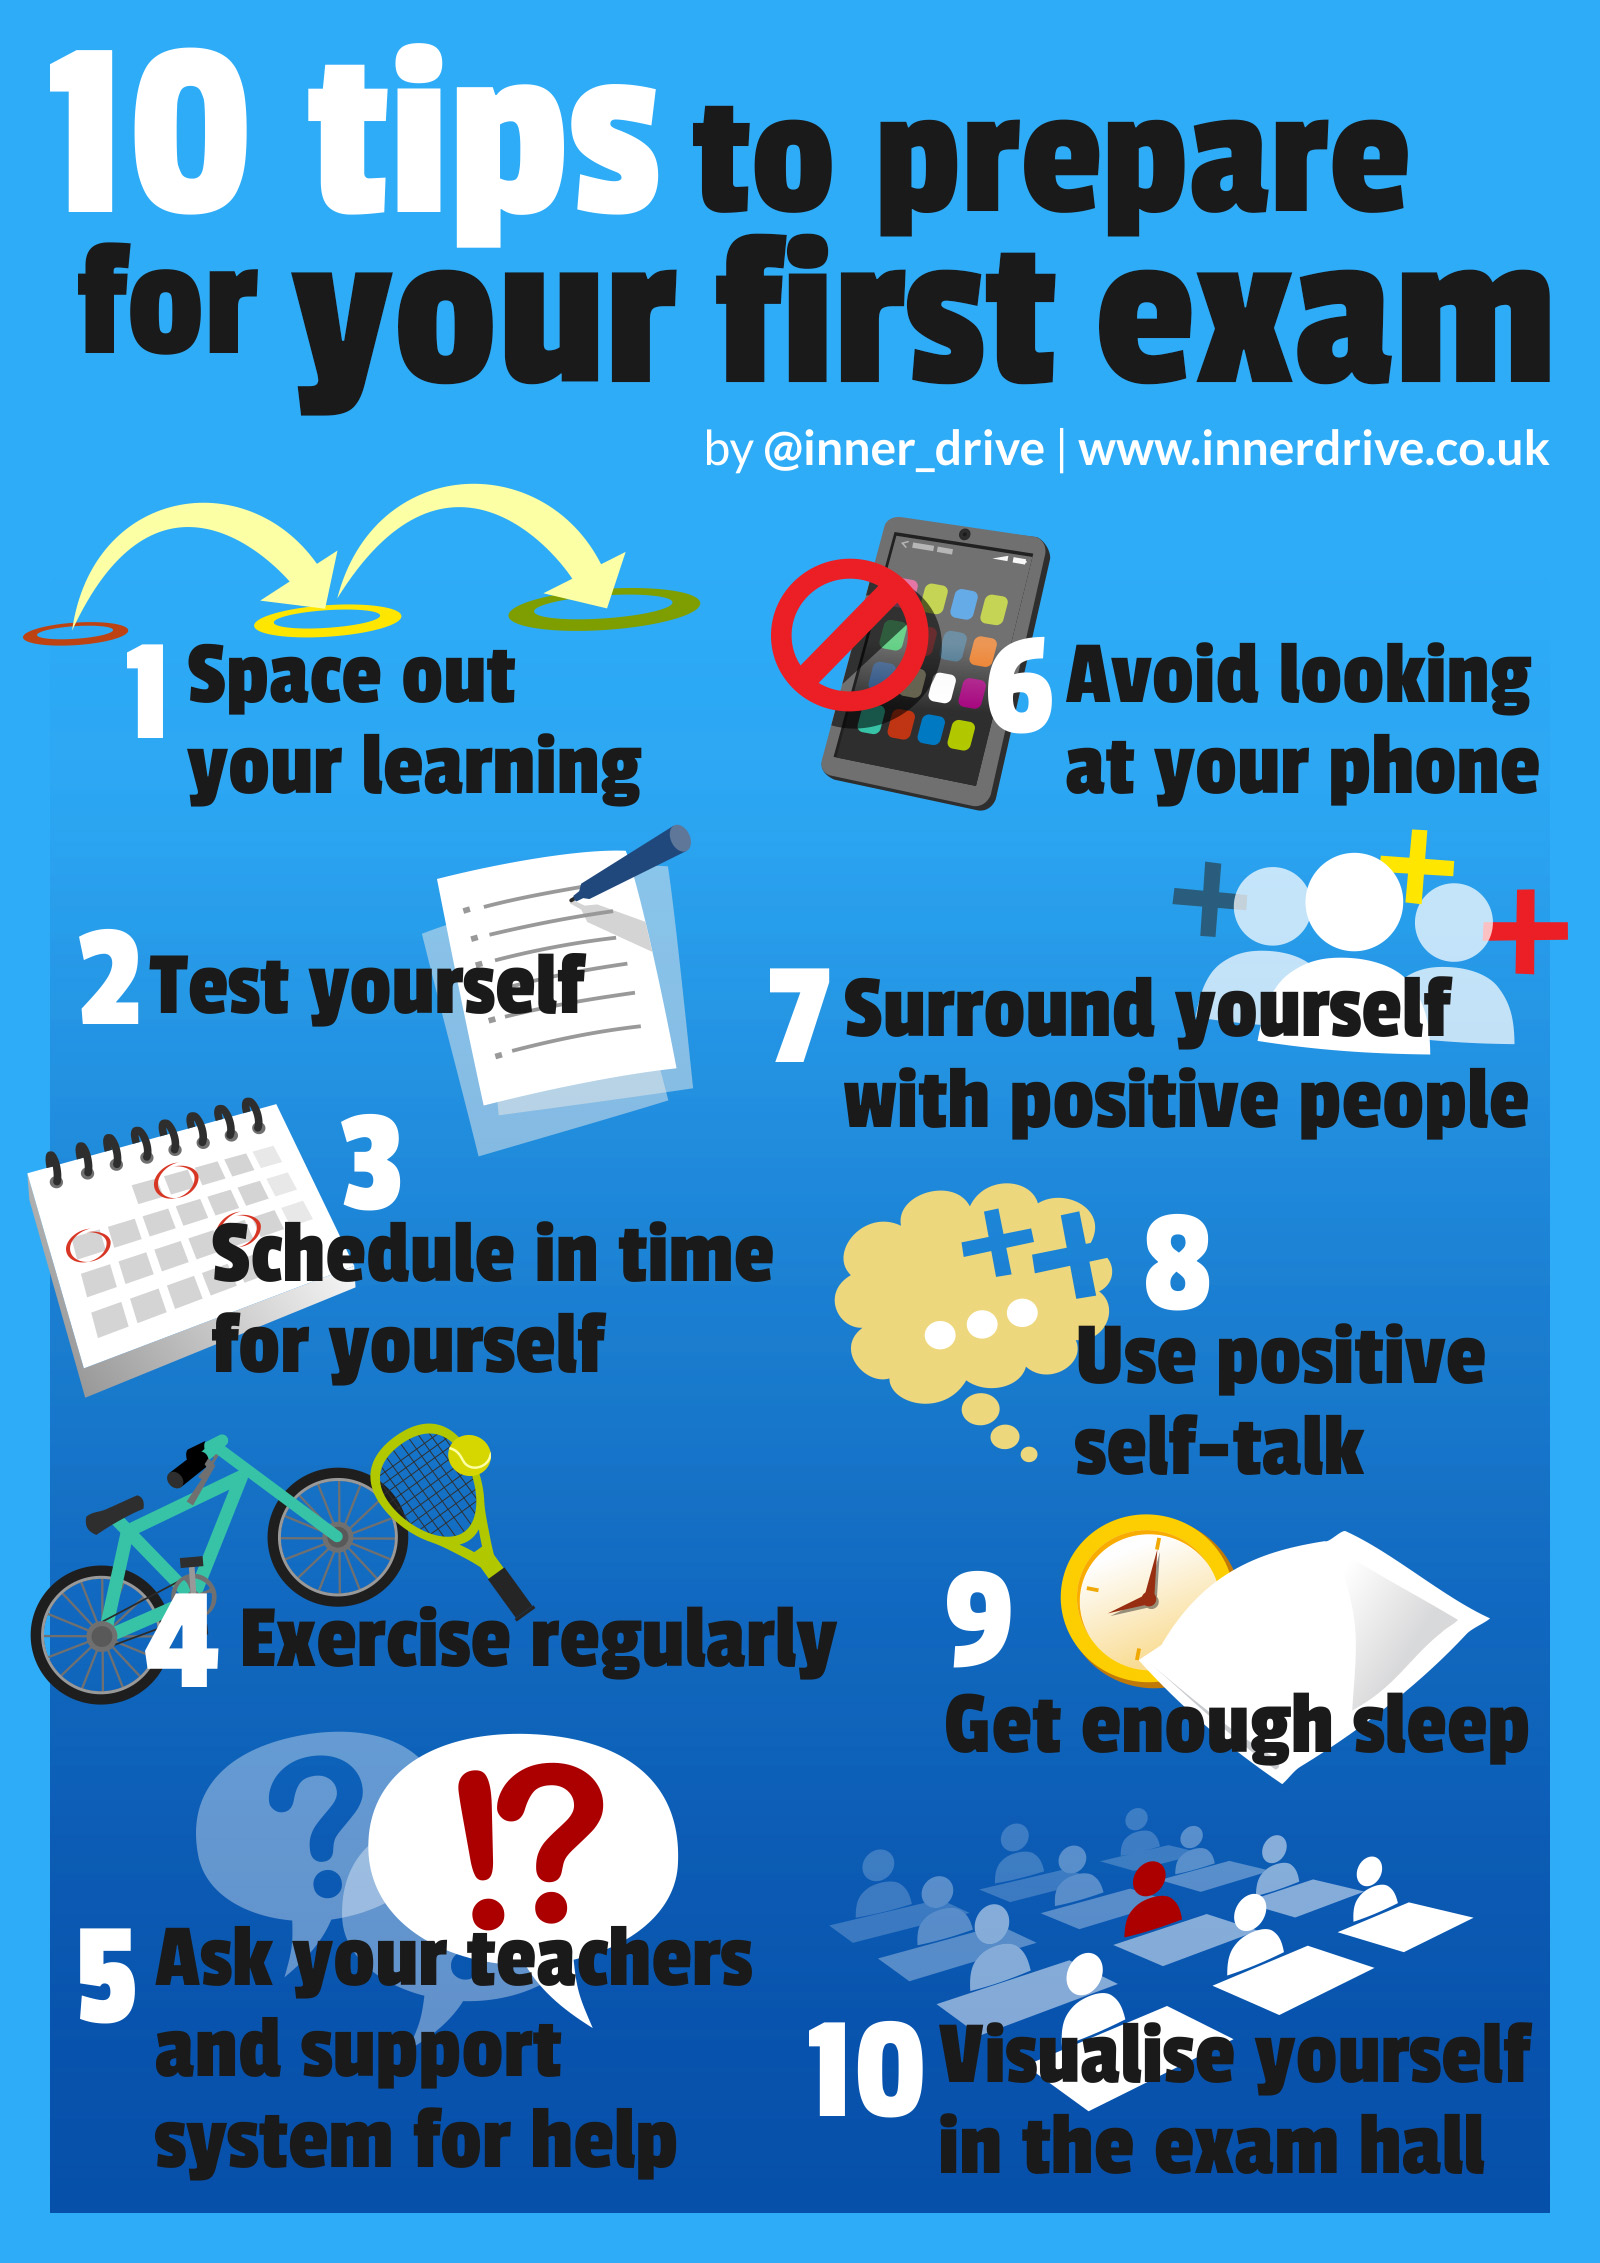 10-tips-to-prepare-for-your-first-exam